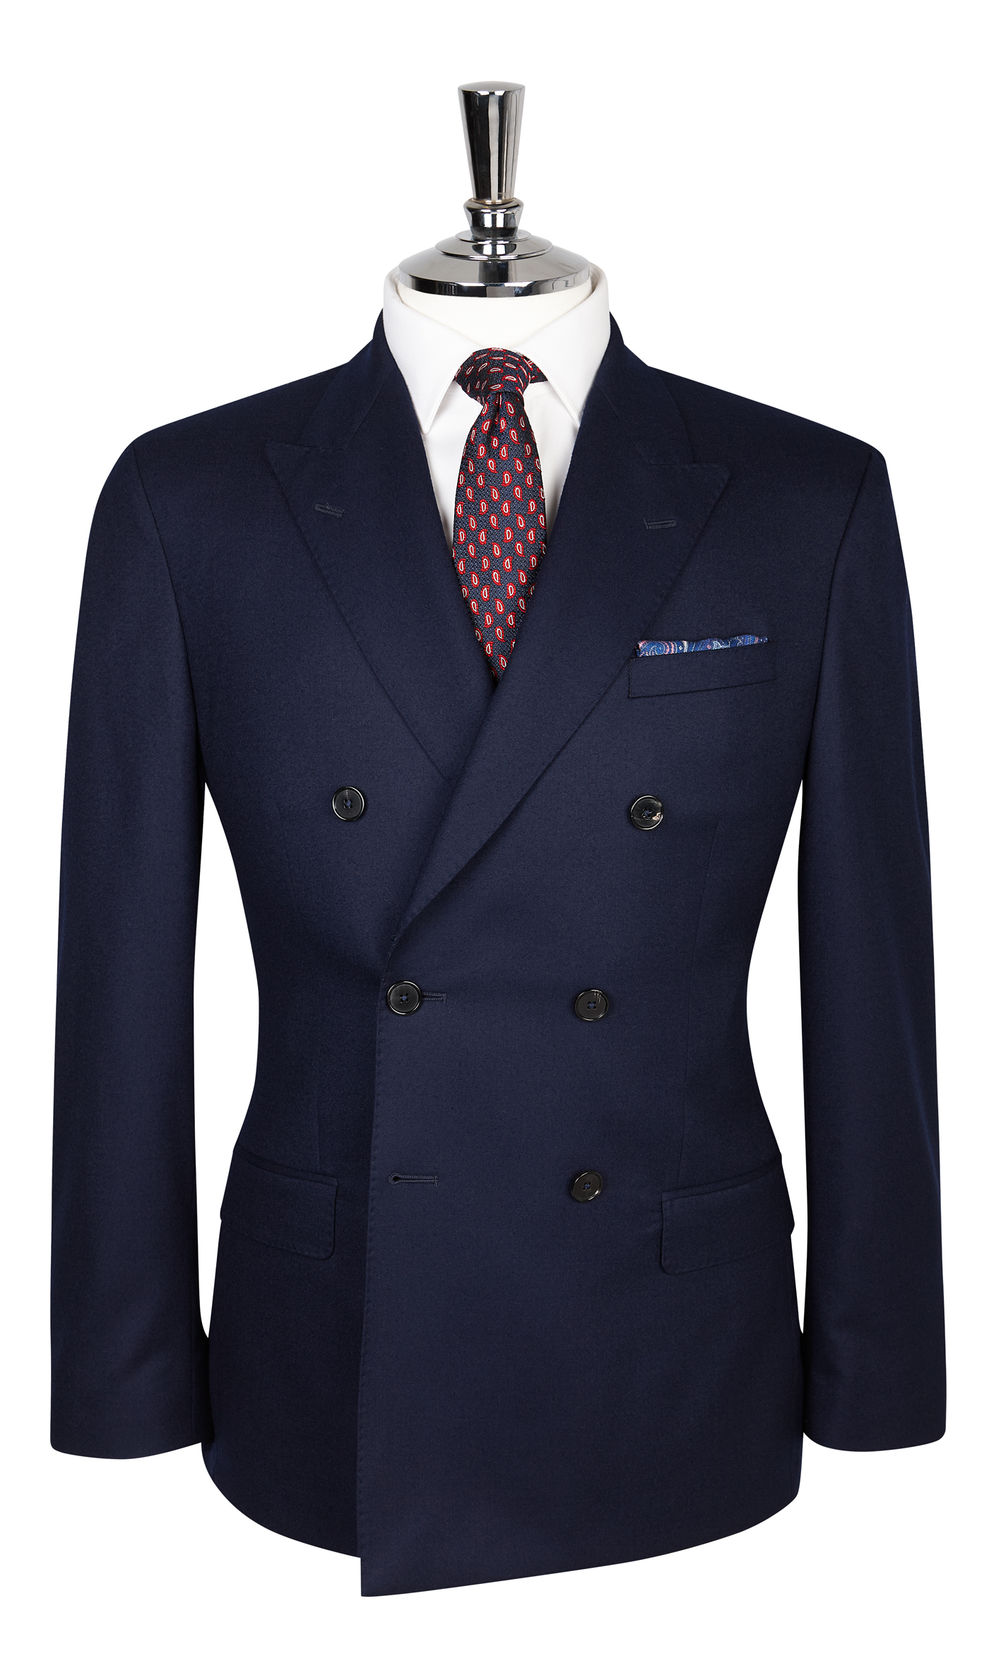 Navy Double Breasted Suit - Makers, Designer & Supplier Of Suits Nigeria